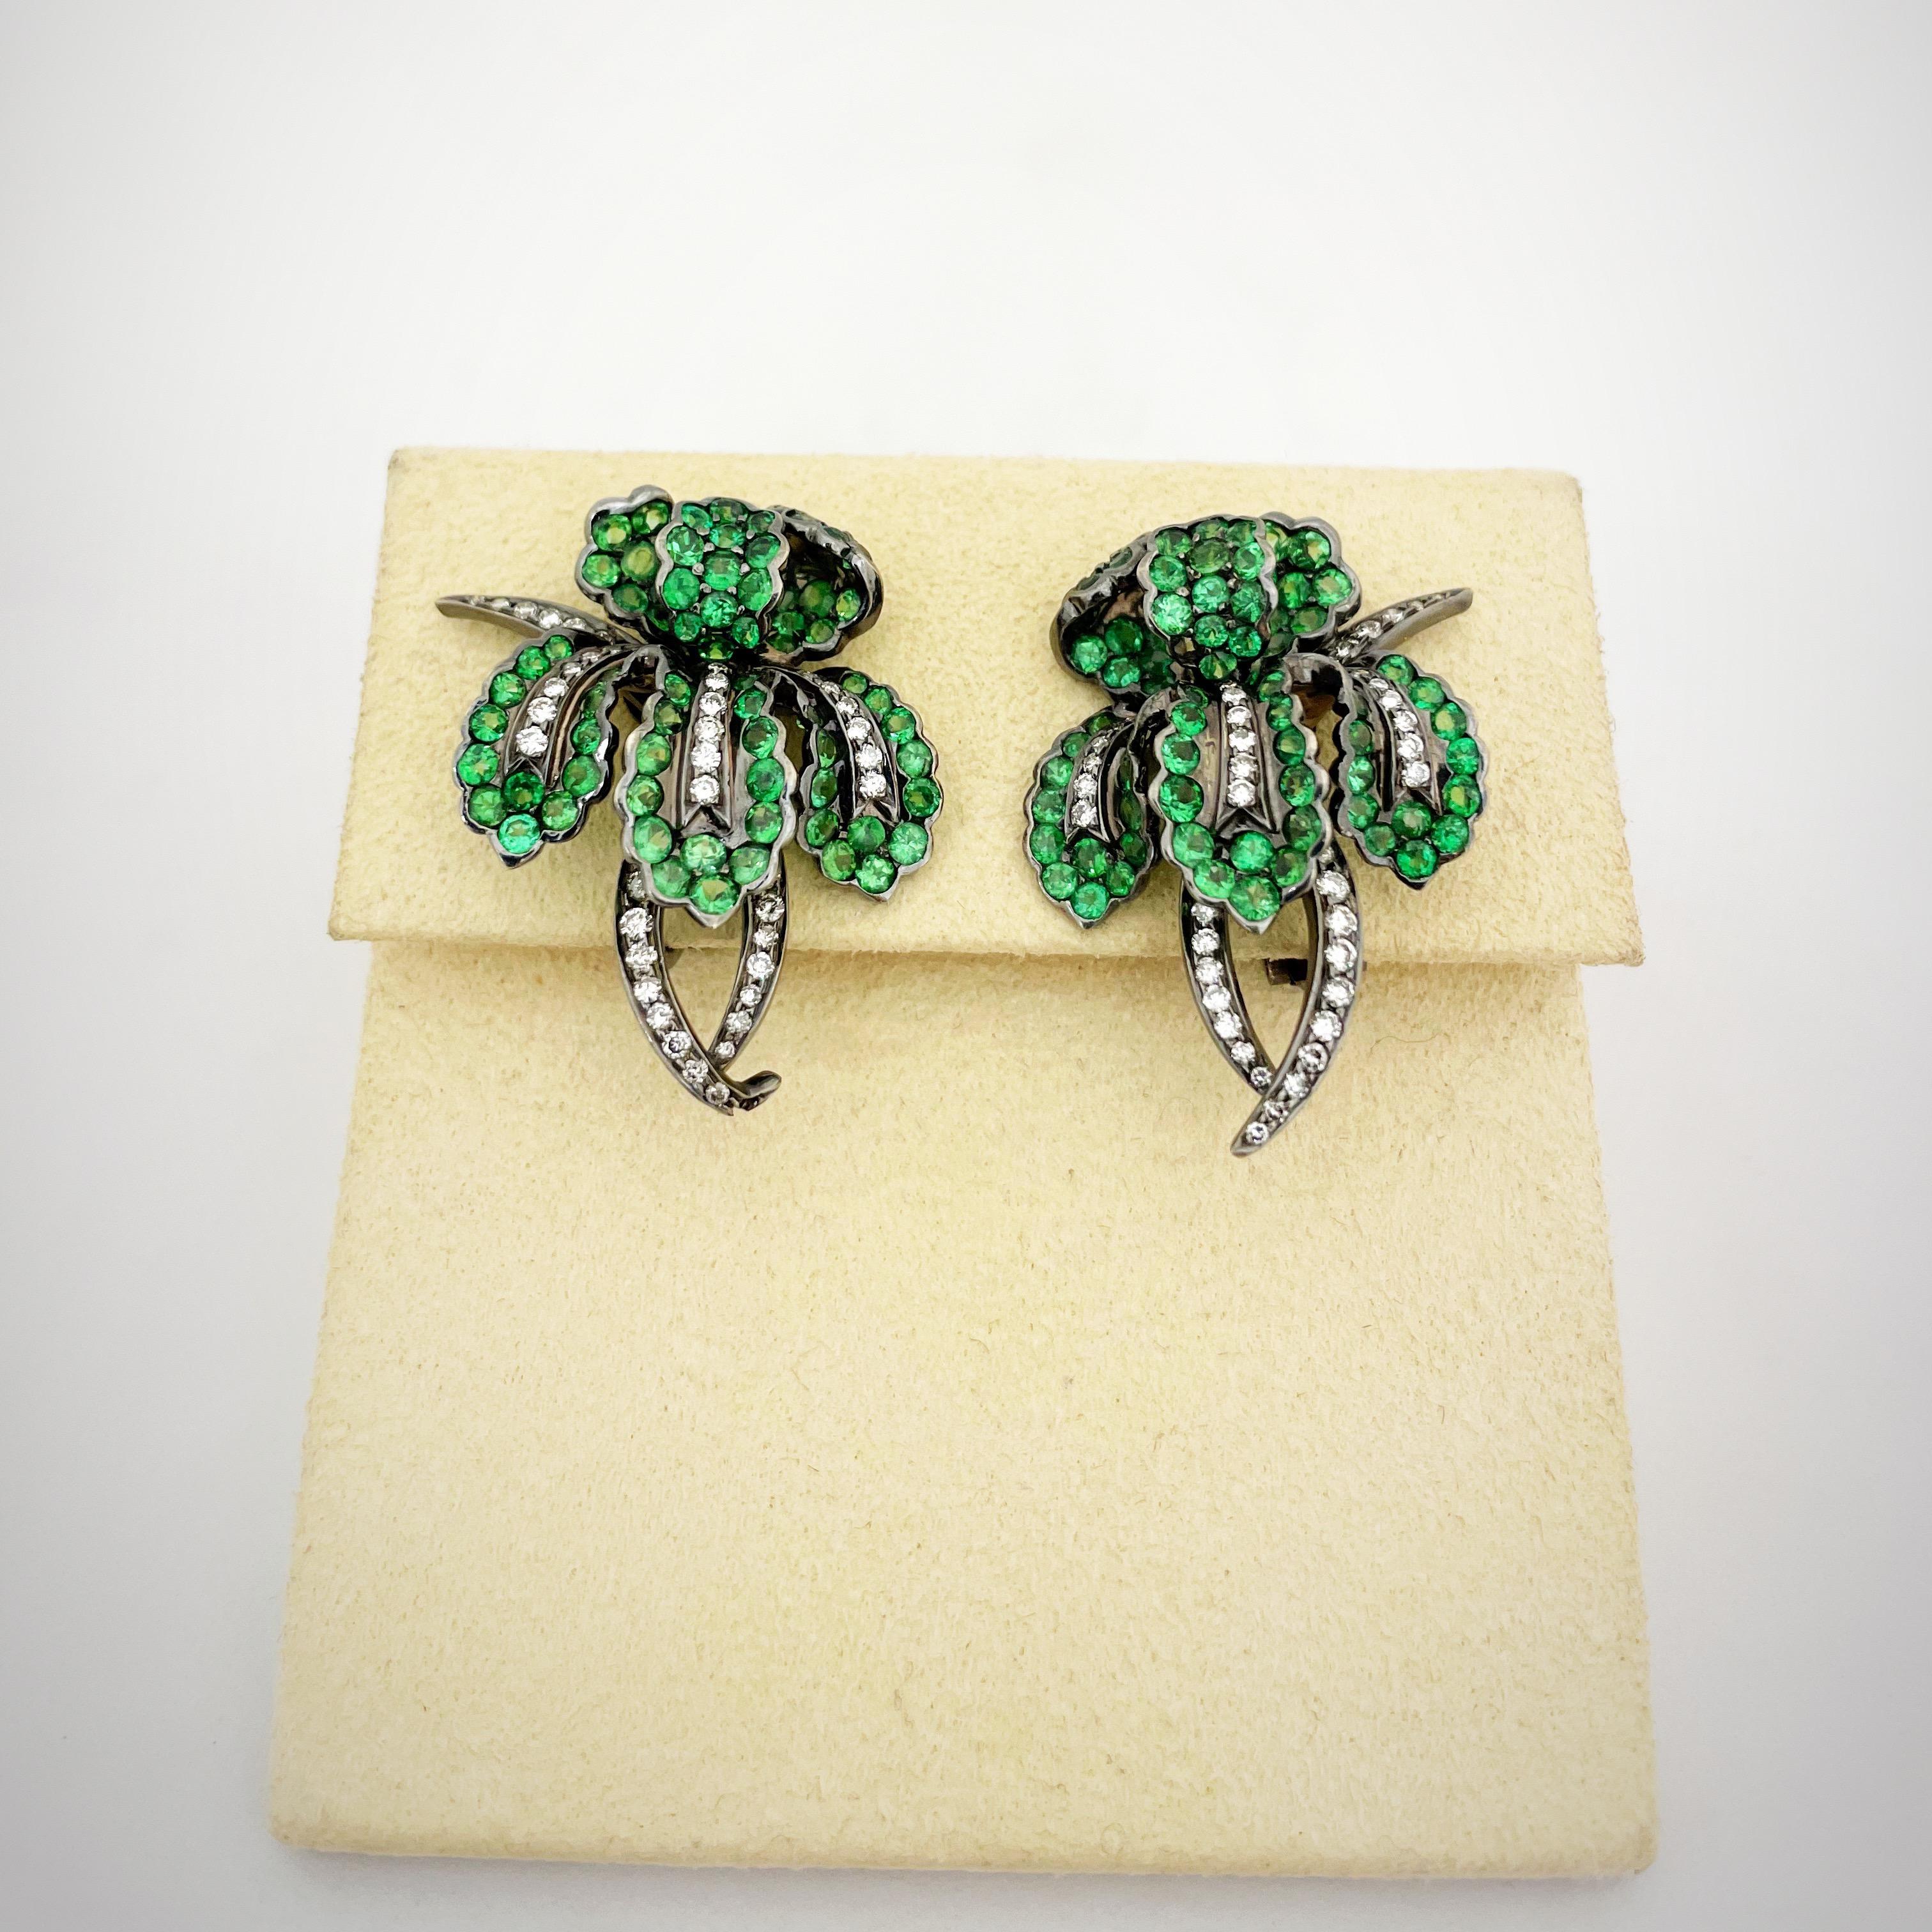 Cellini NYC beautifully crafted 18 karat gold ear clips. Green tsavorites and brilliant diamonds have been meticulously set in blackened gold for a dramatic look in these orchid flower earrings. The earrings measure 1-3/8